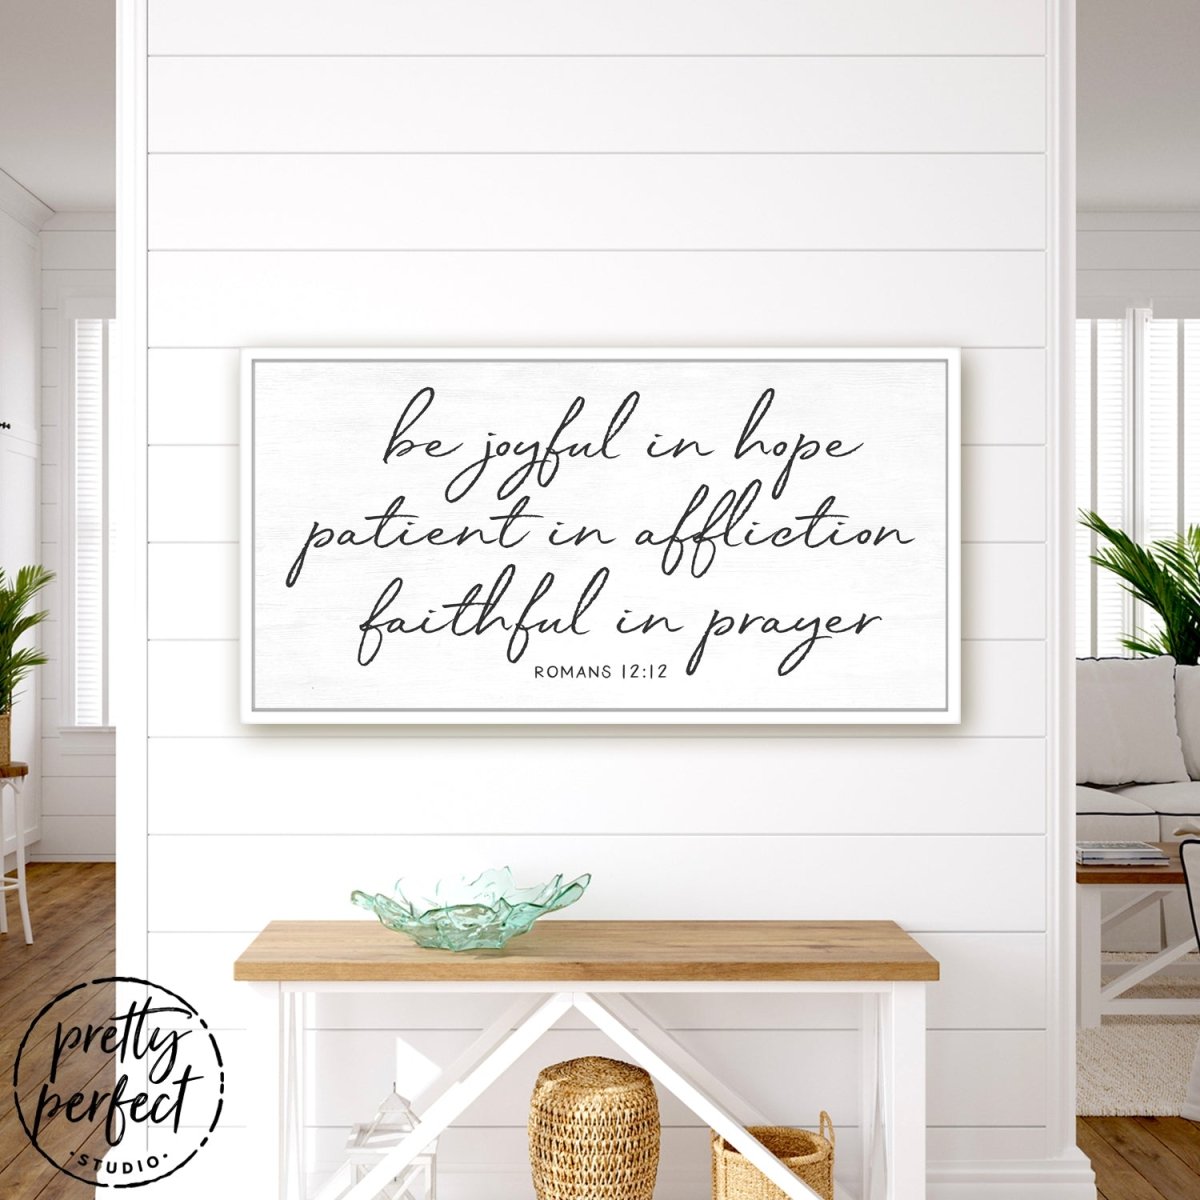 Be Joyful In Hope Sign Hanging on Wall Above Entryway Bench – Pretty Perfect Studio